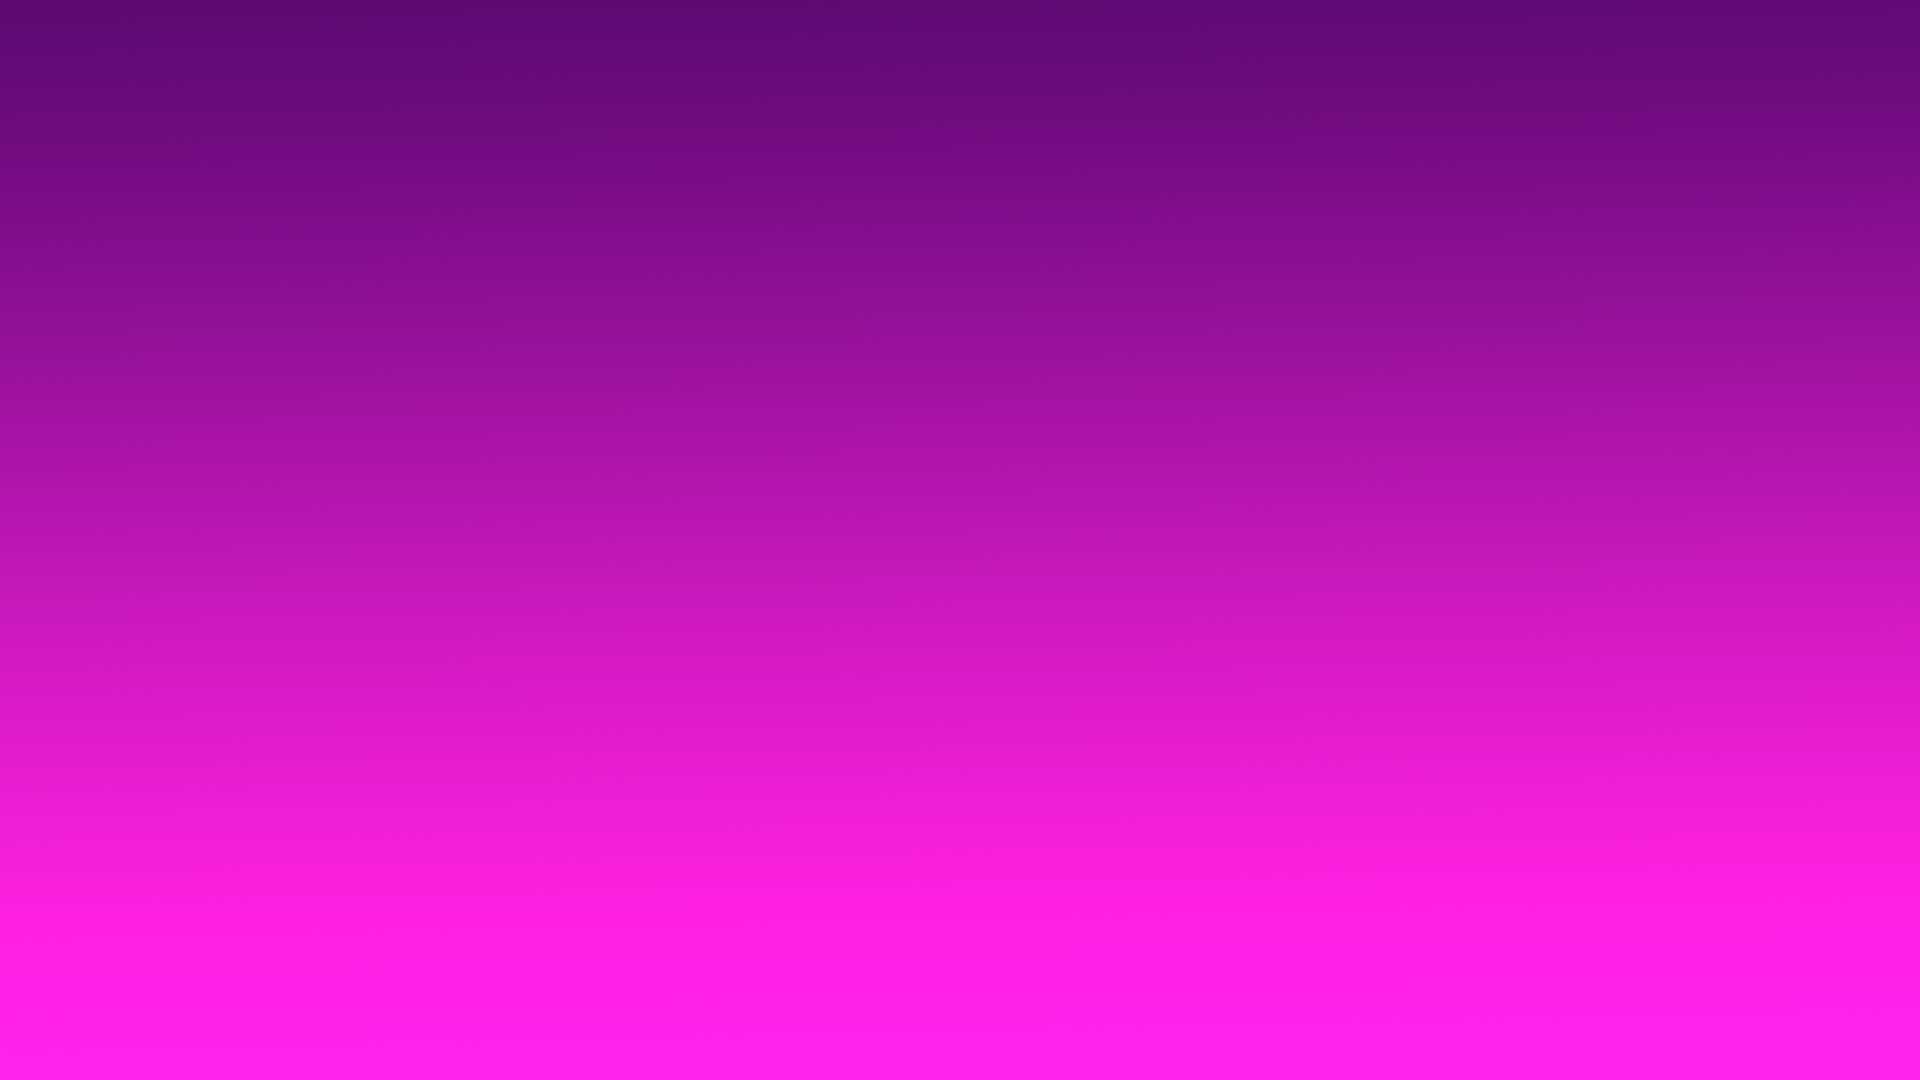 Gallery For Gt Pink And Purple Gradient Background